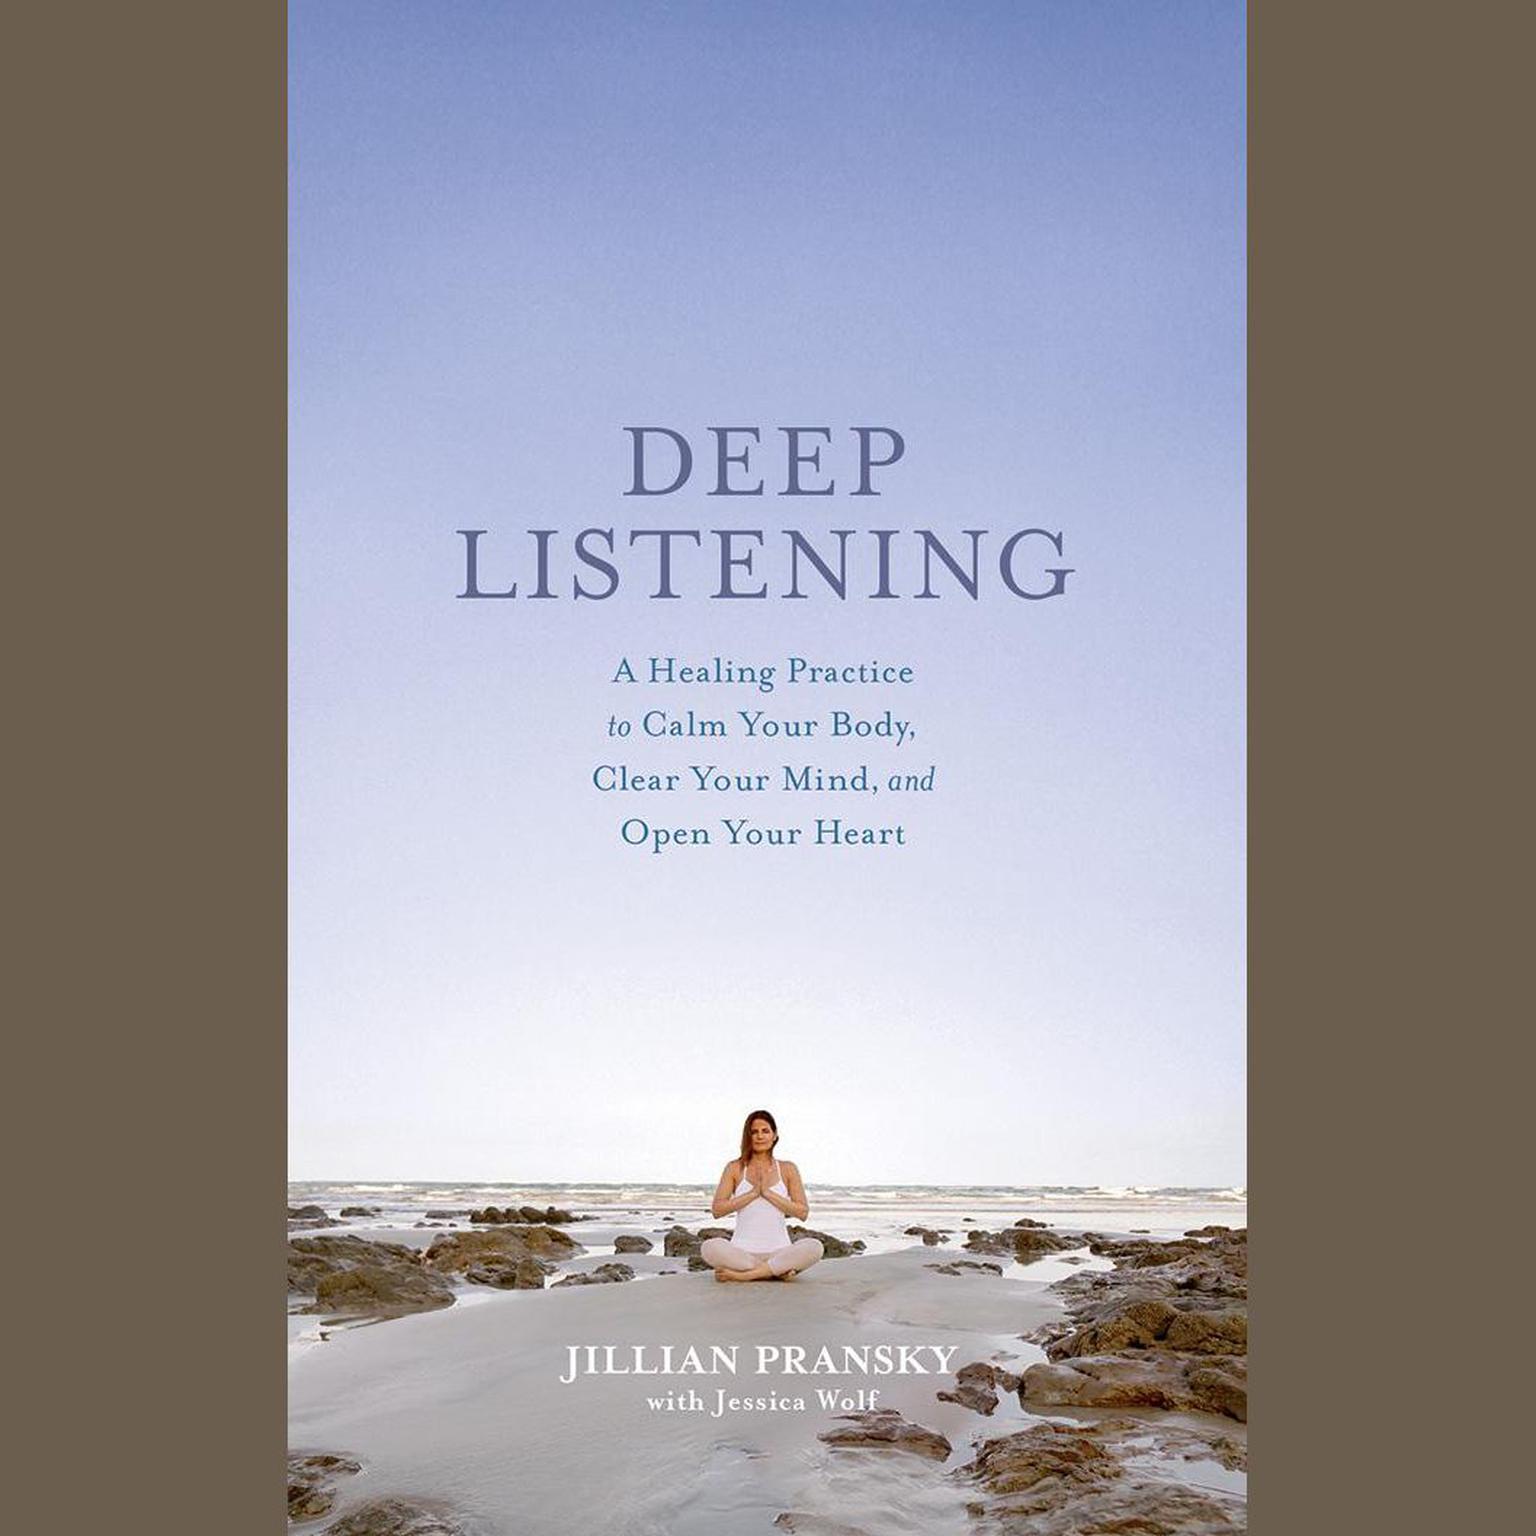 Deep Listening: A Healing Practice to Calm Your Body, Clear Your Mind, and Open Your Heart Audiobook, by Jillian Pransky